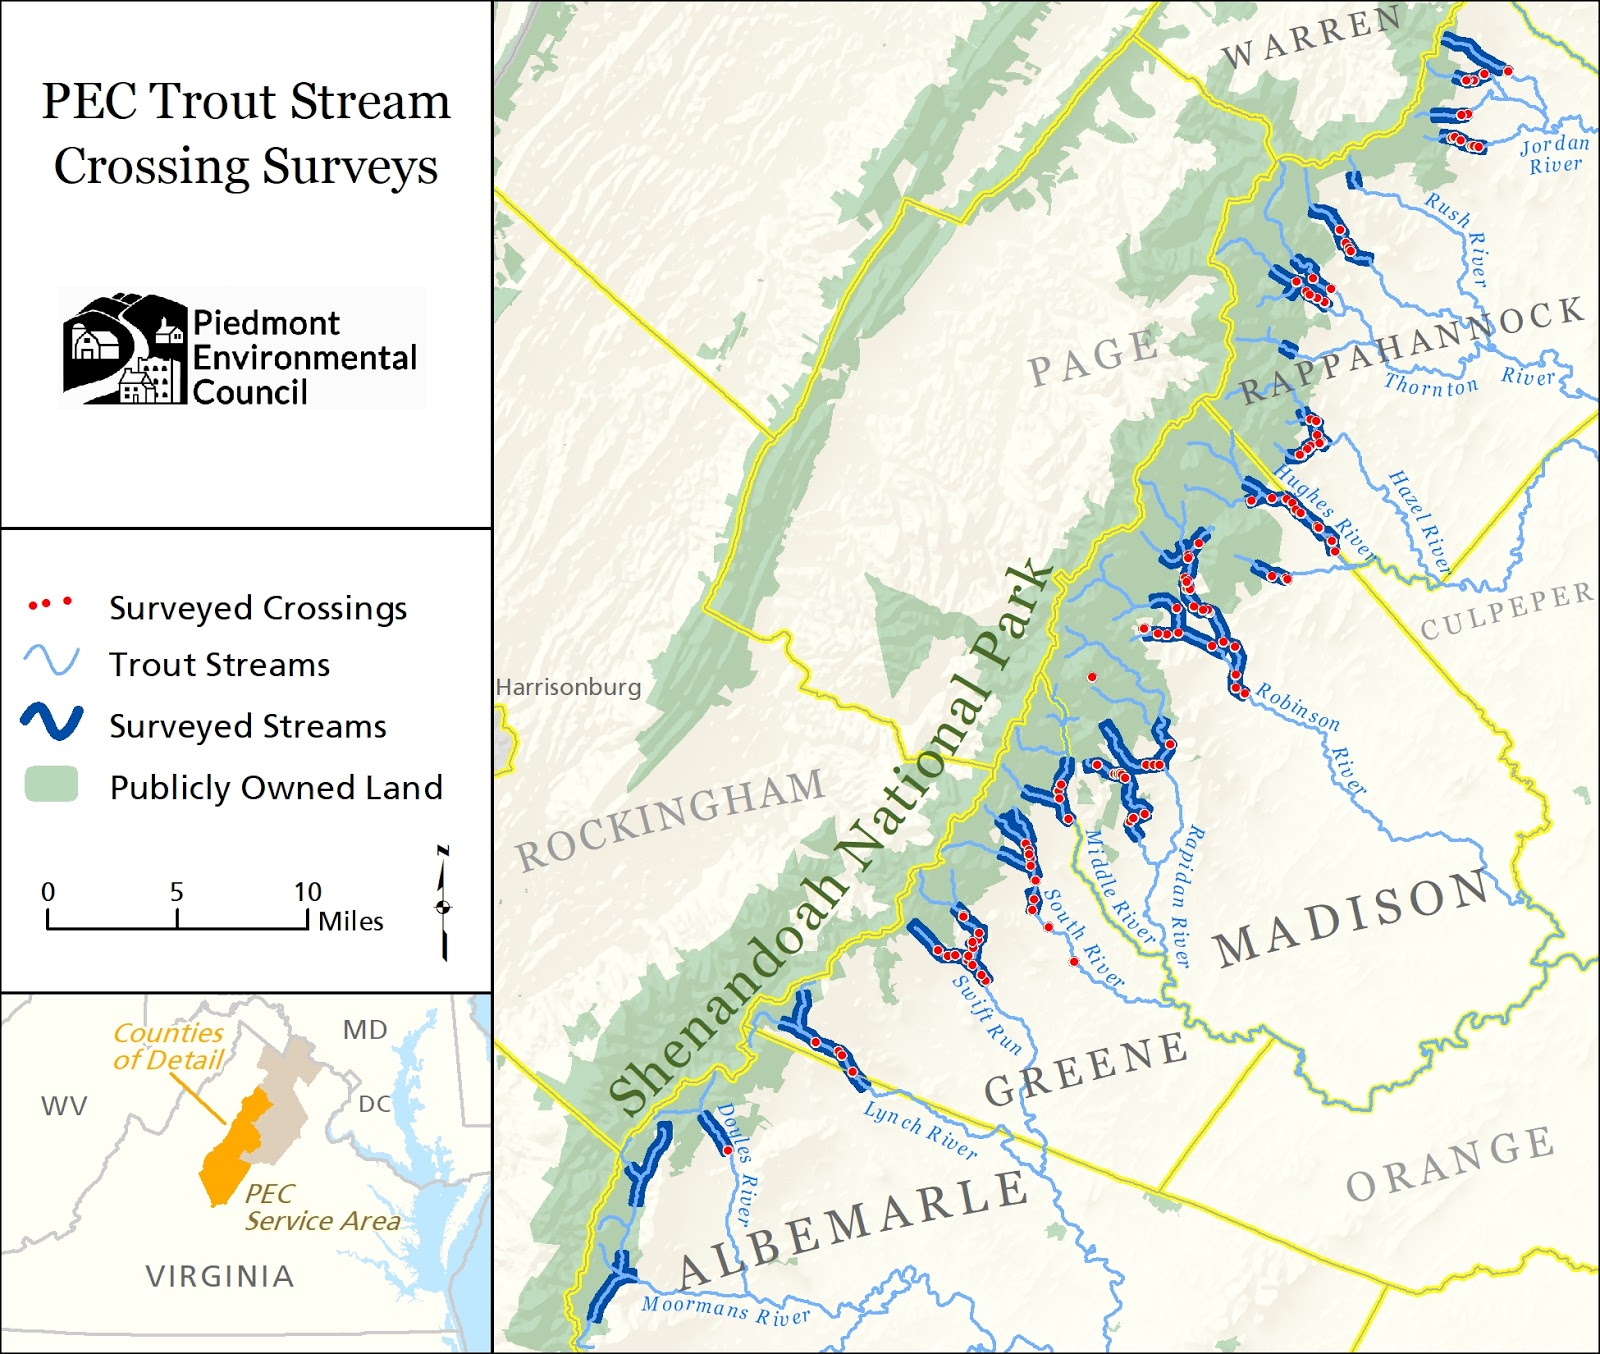 map of trout streams surveyed with crossings indicated